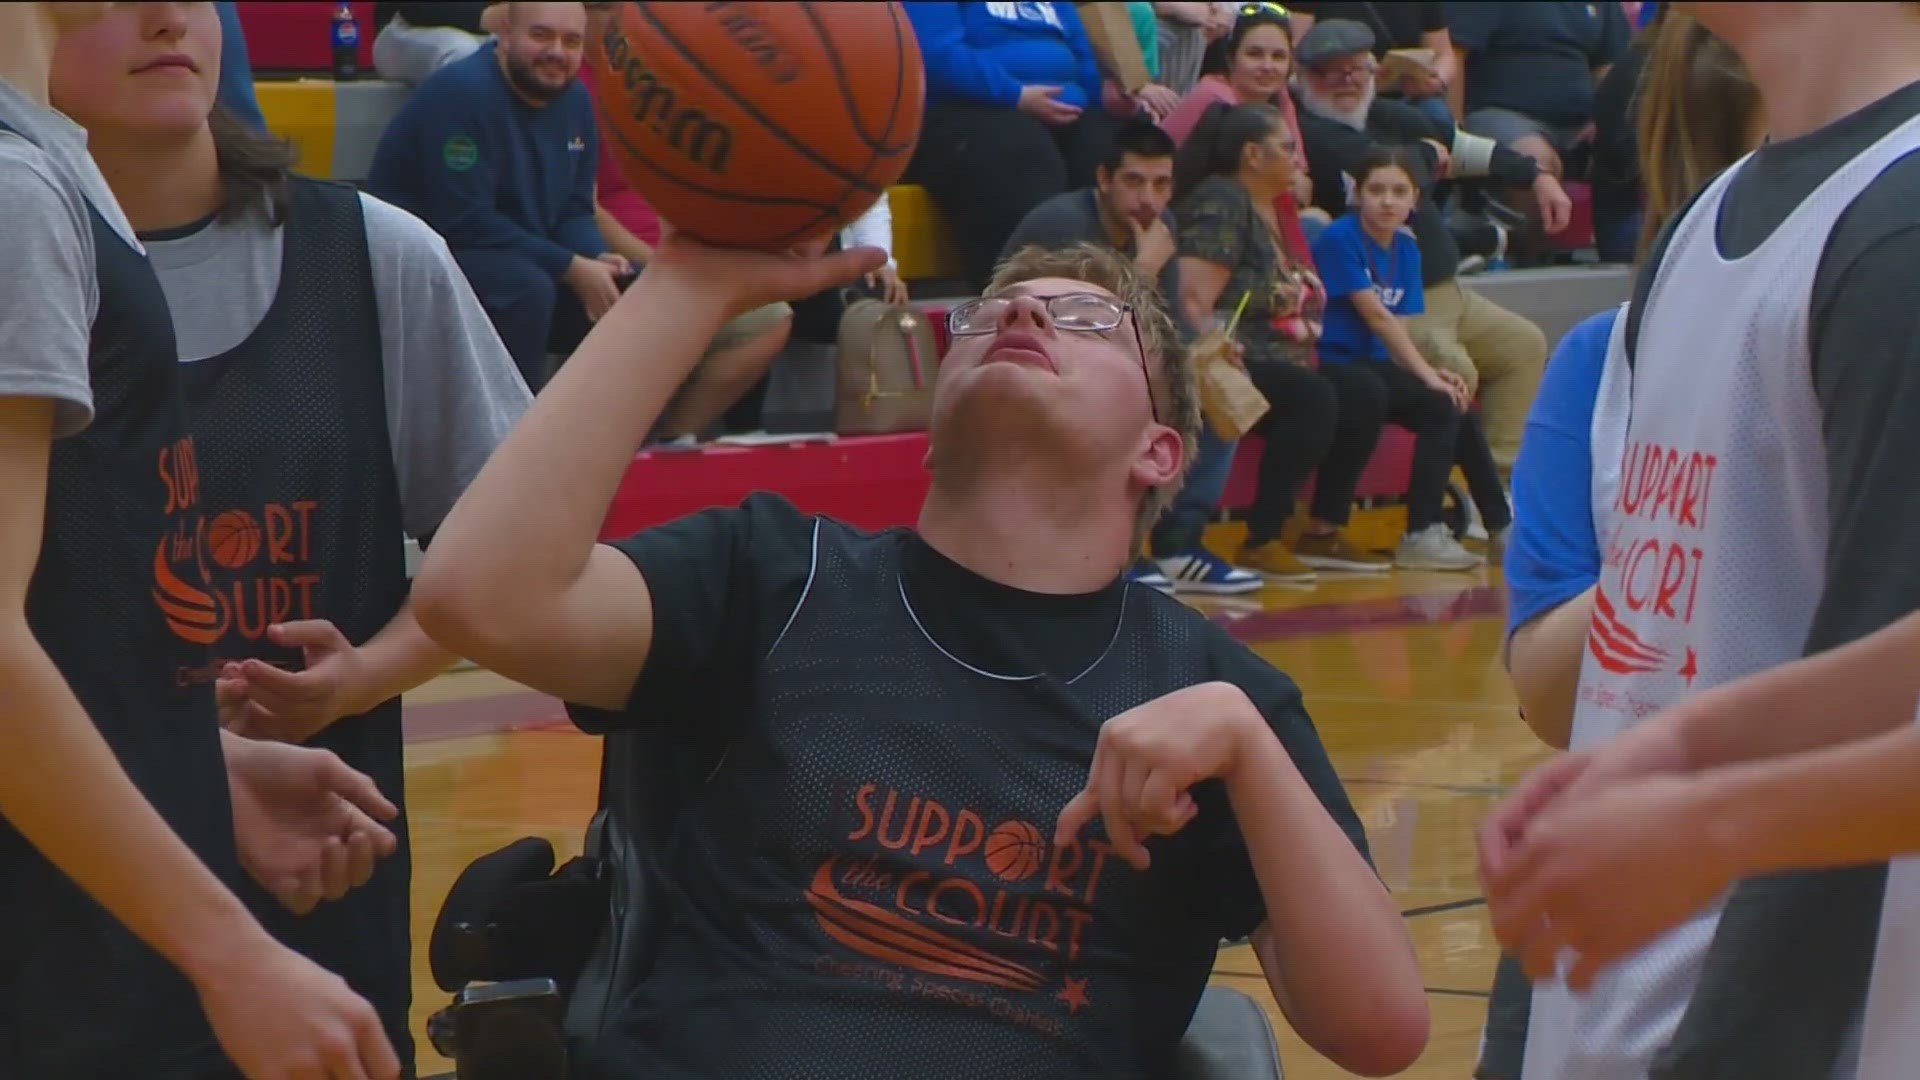 The game brings together "differently-abled" students from Nyssa, Vale and Ontario in Oregon for a game of basketball.